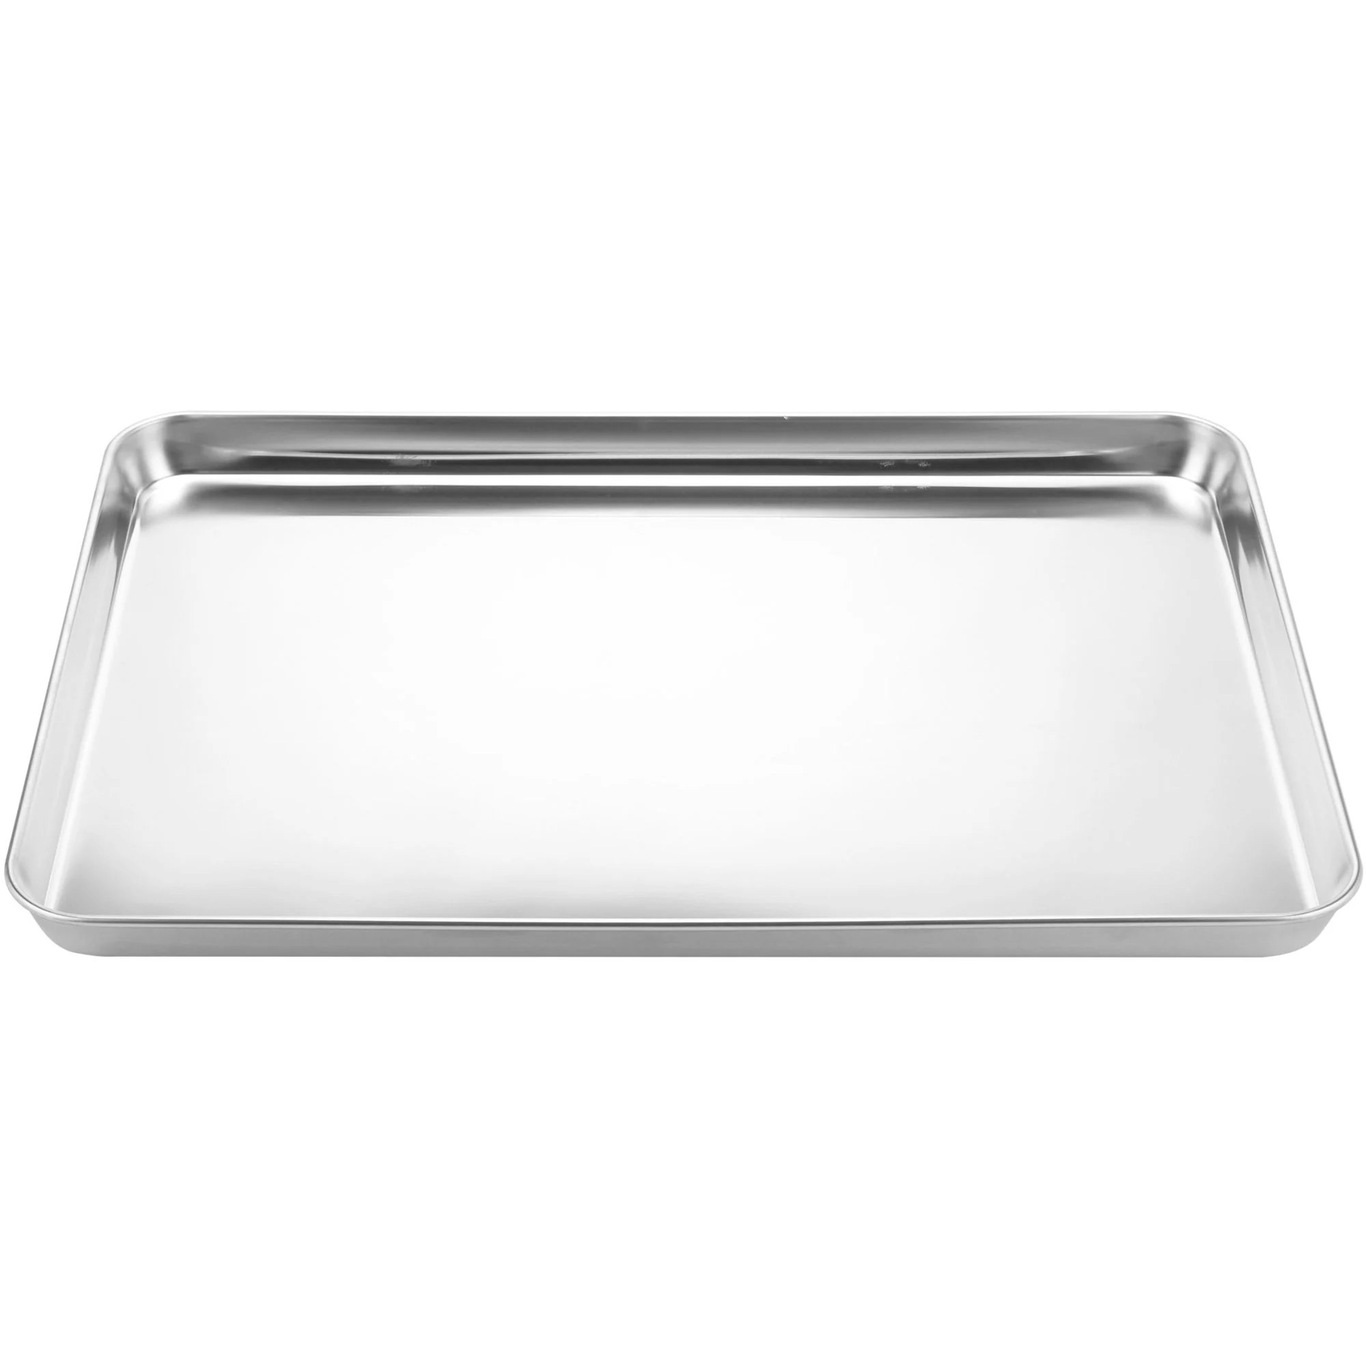 Nordic Ware Extra Large Oven Crisping Baking Tray, with Rack, Silver